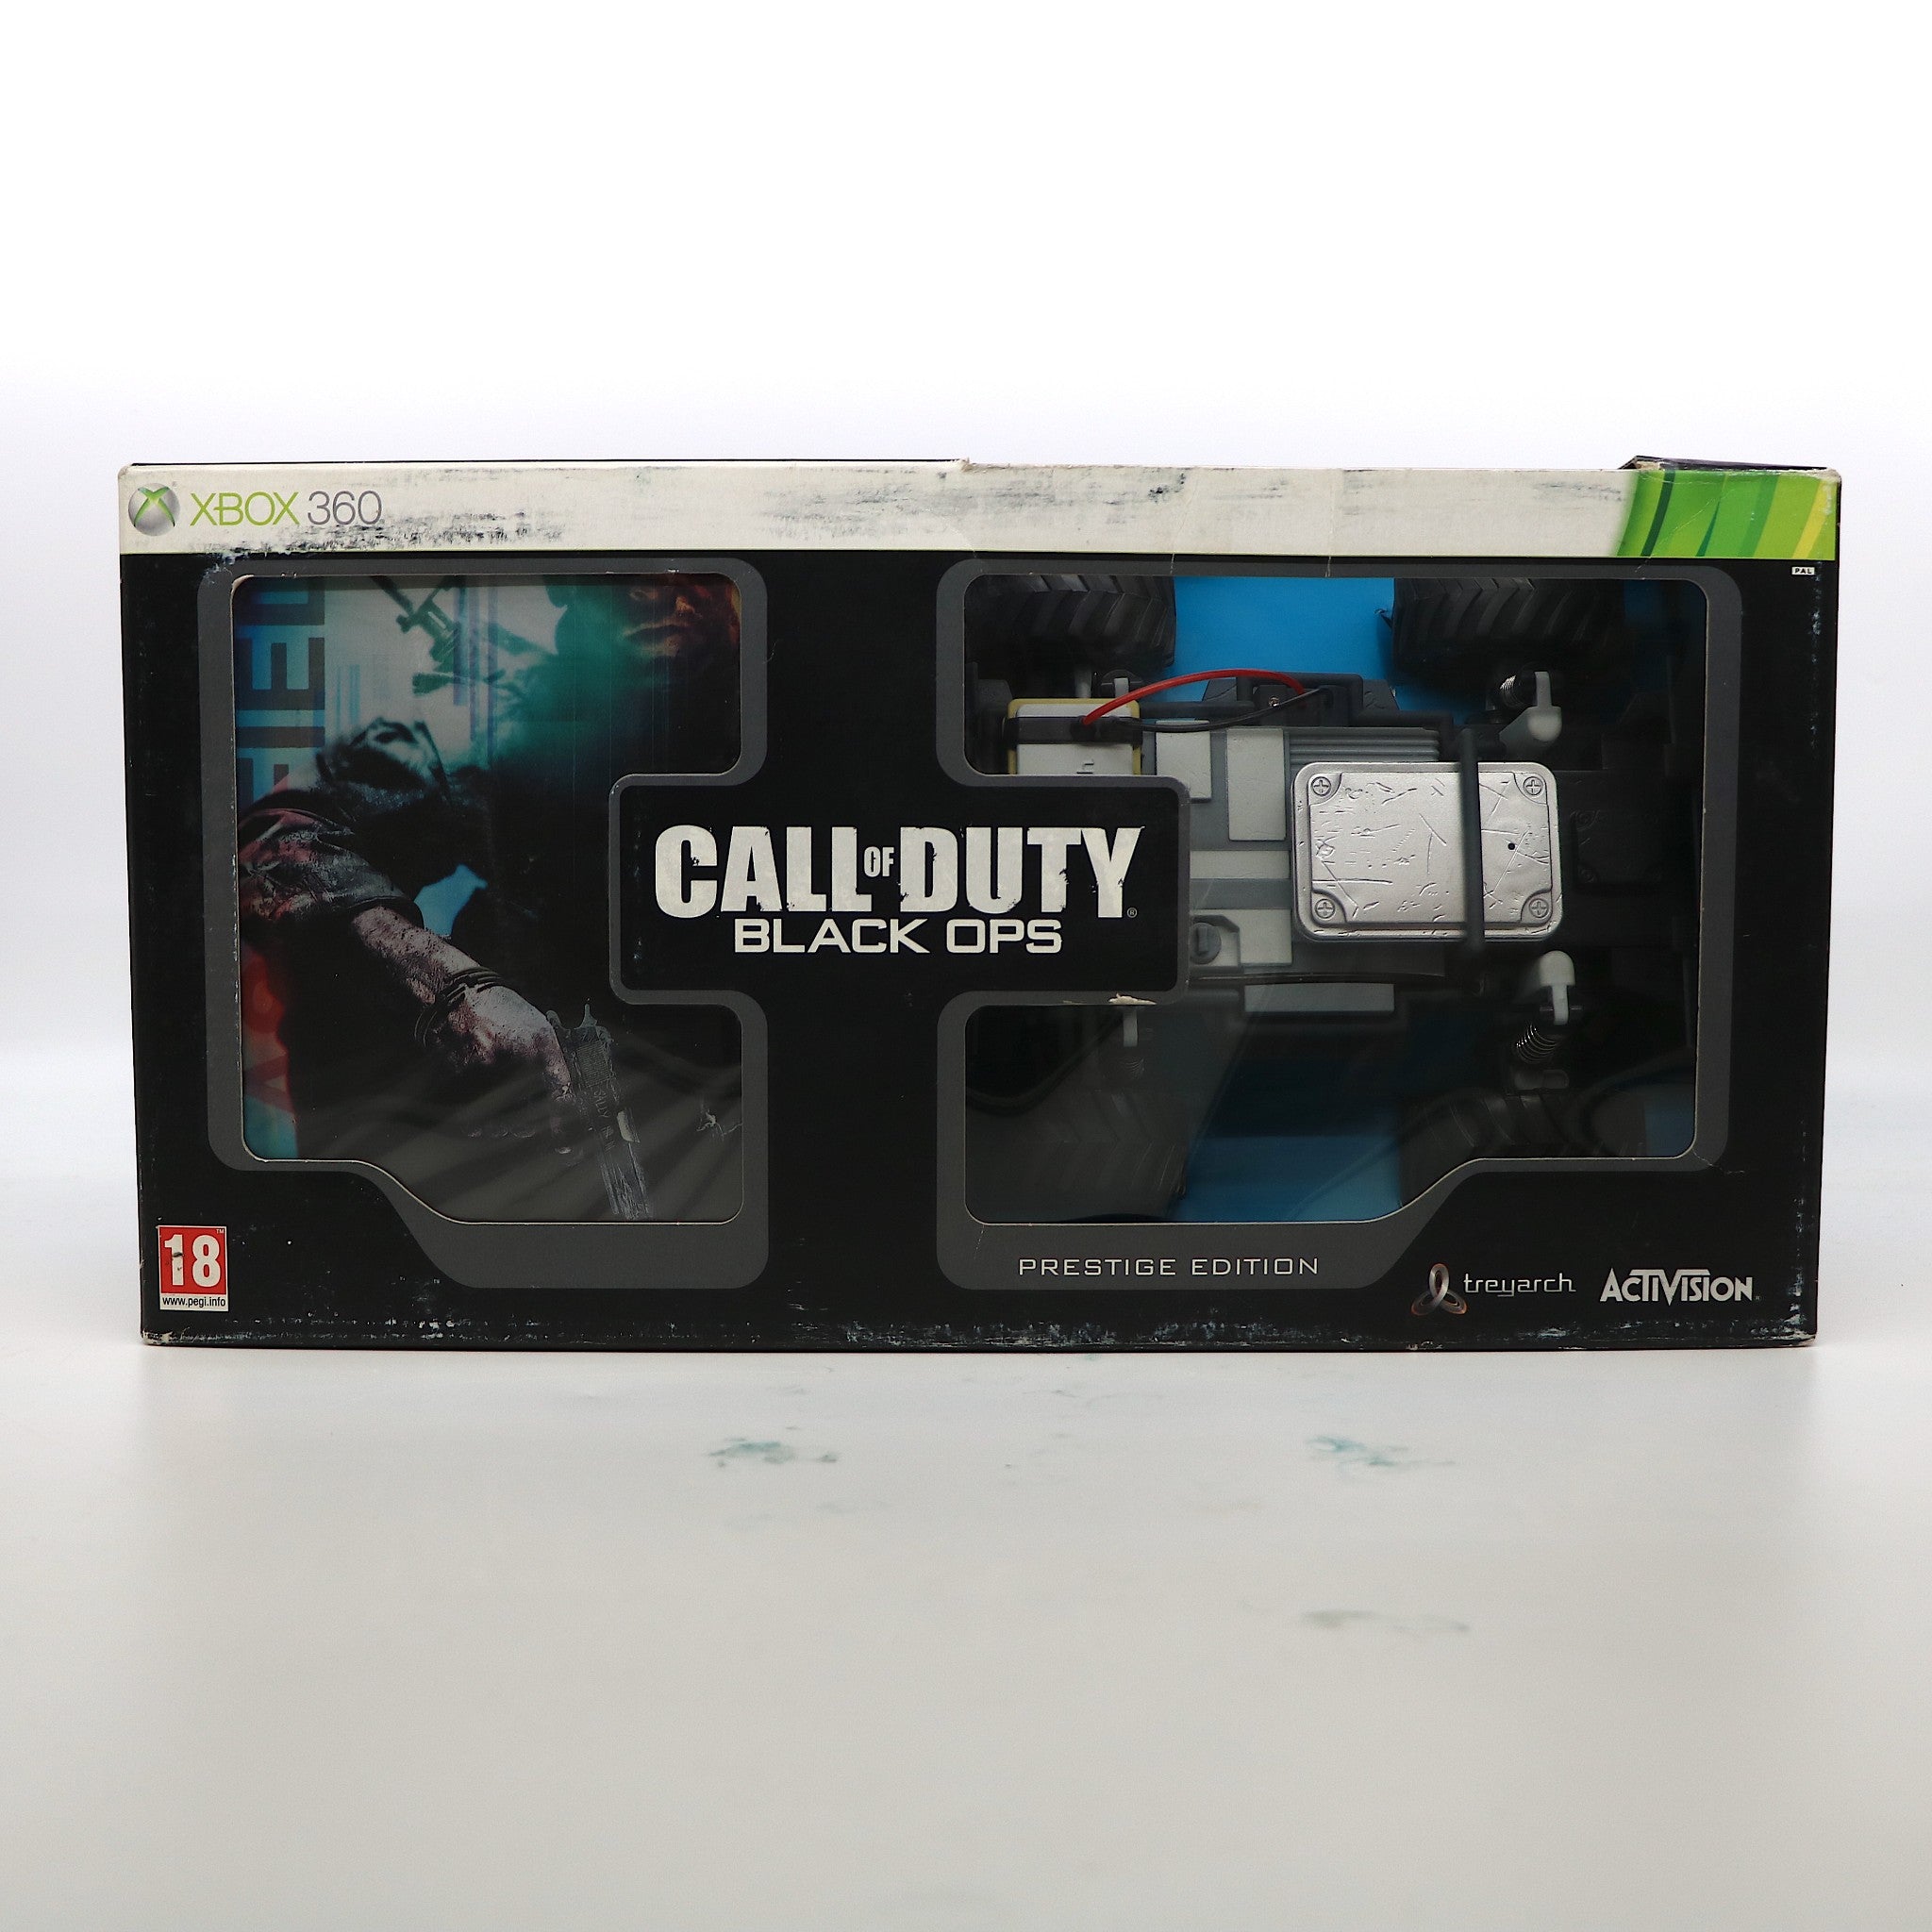 Call of Duty (COD) Black Ops | Xbox 360 Game | Prestige Edition | New & Sealed